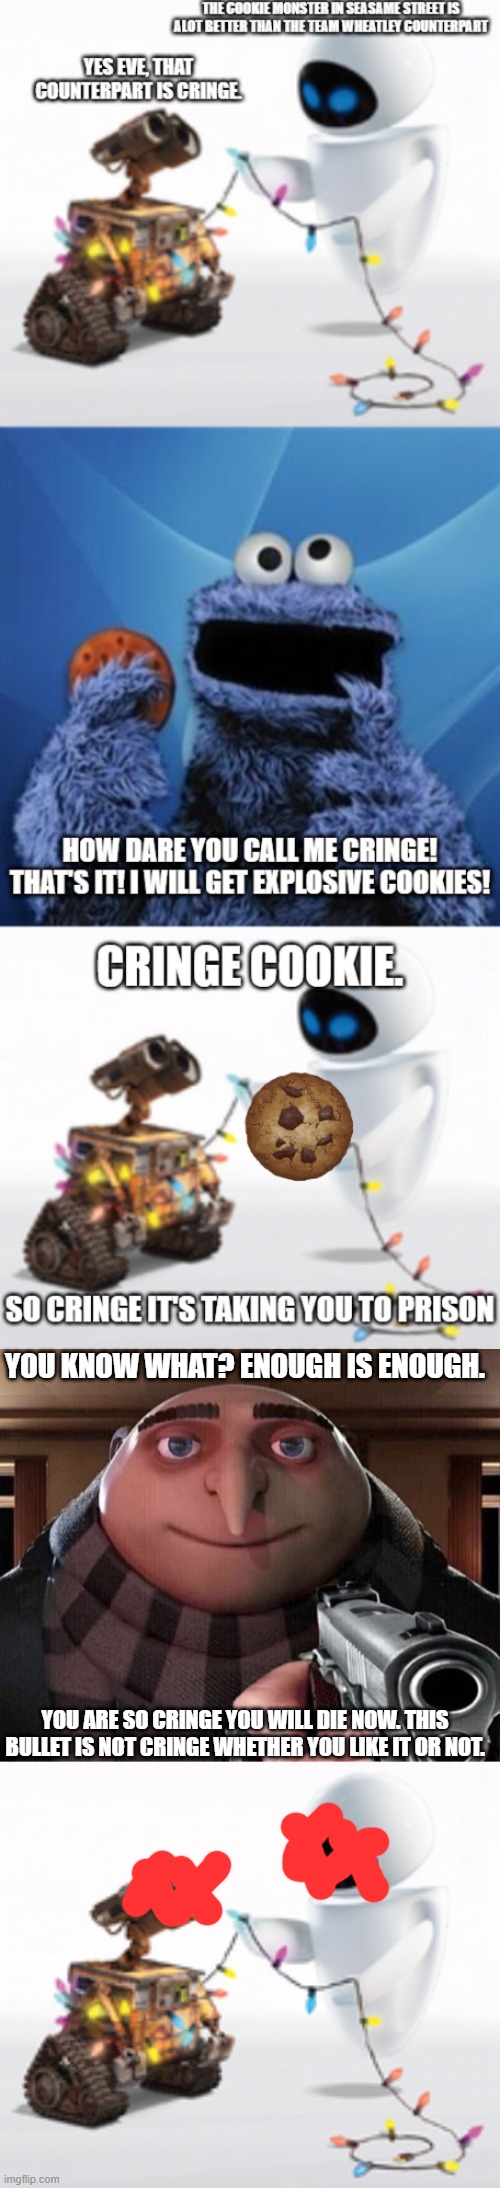 YOU KNOW WHAT? ENOUGH IS ENOUGH. YOU ARE SO CRINGE YOU WILL DIE NOW. THIS BULLET IS NOT CRINGE WHETHER YOU LIKE IT OR NOT. | image tagged in gru gun,wall-e and eve | made w/ Imgflip meme maker